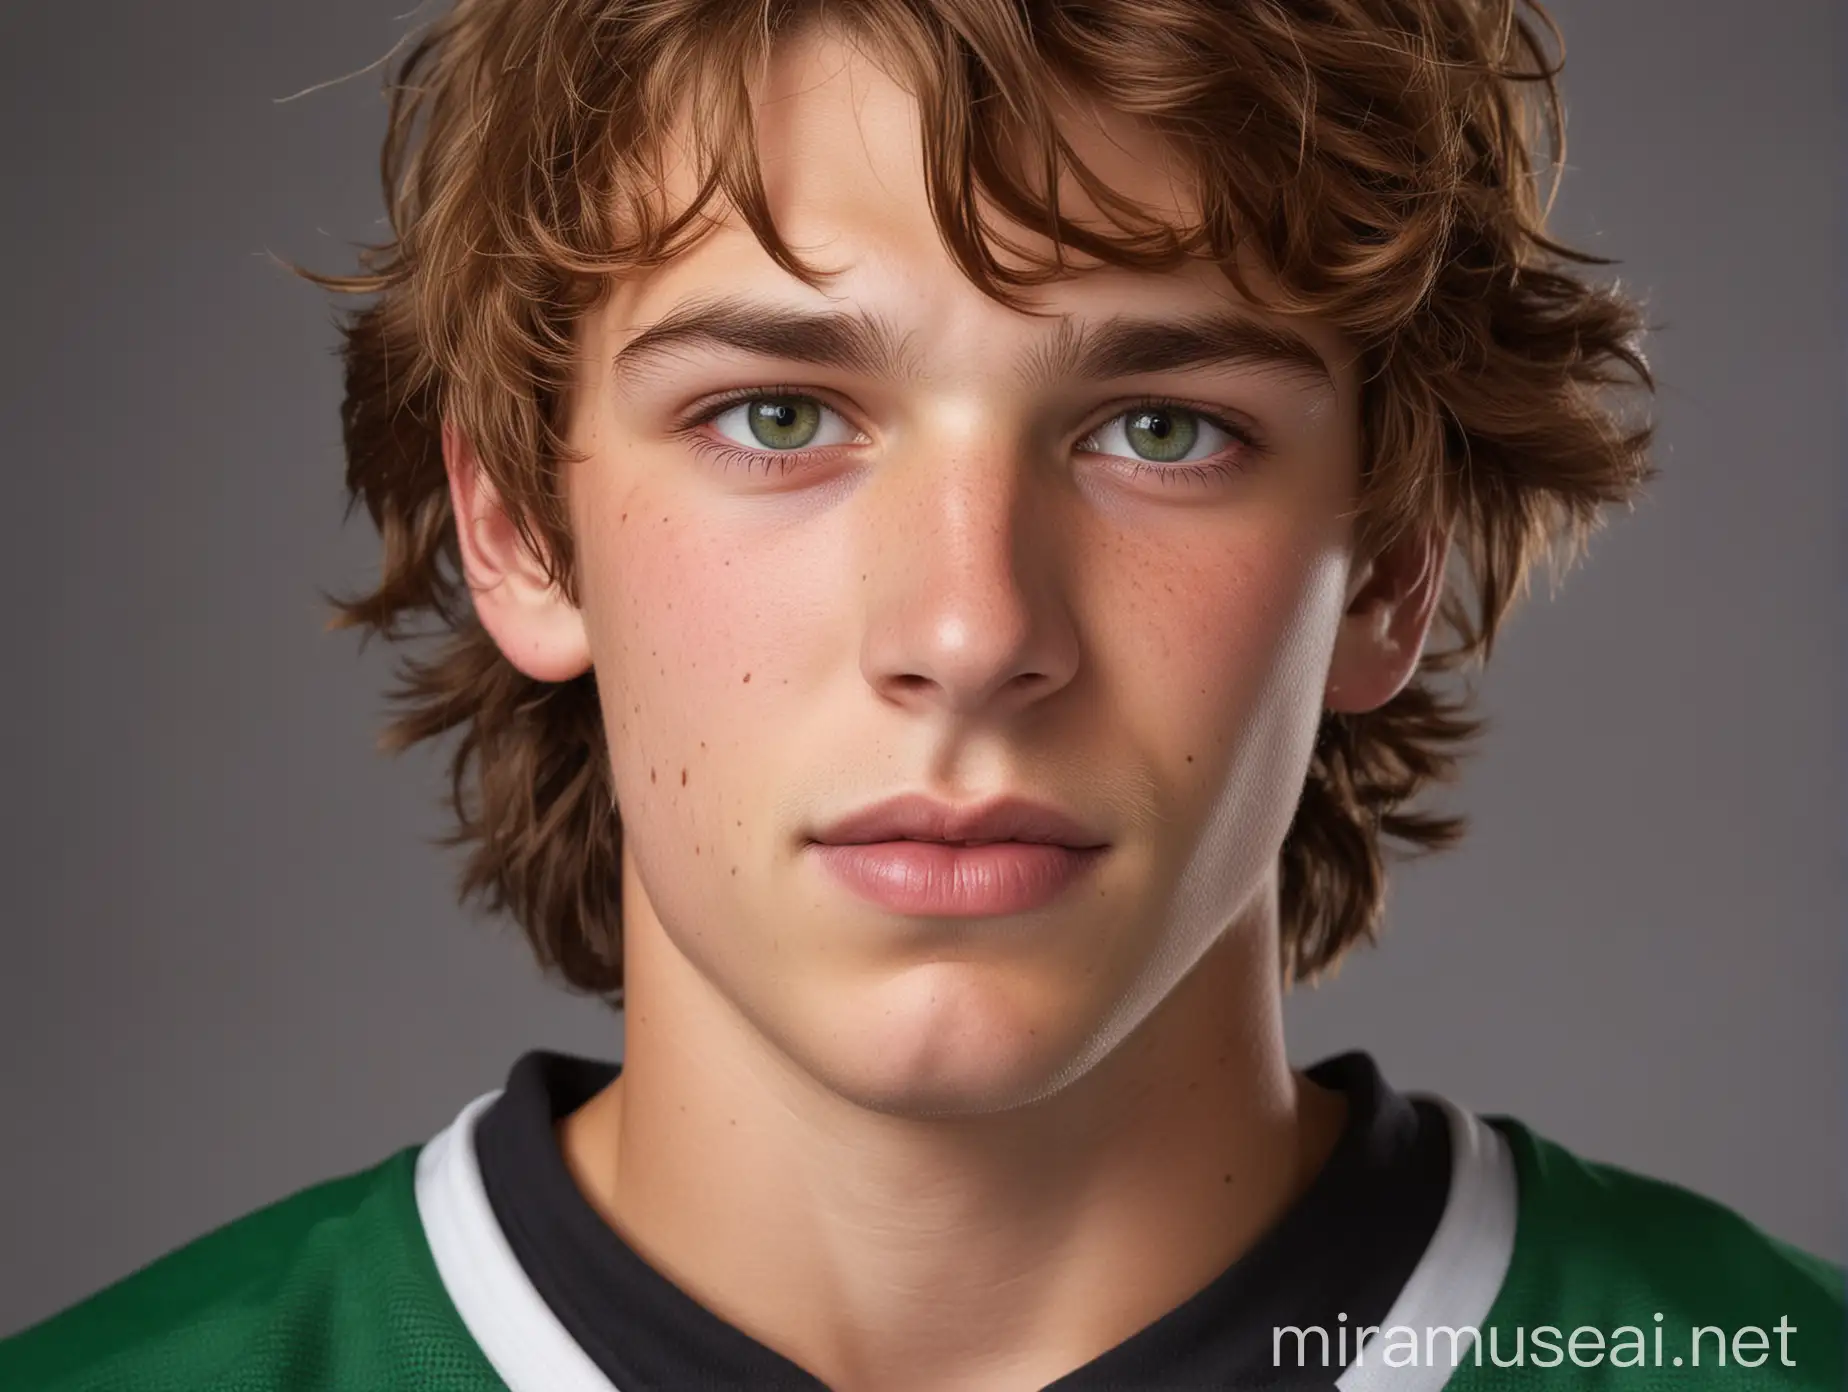 






A handsome teen hockey player with light green eyes and wavy chestnut hair. He has an angular jaw and hard muscles.